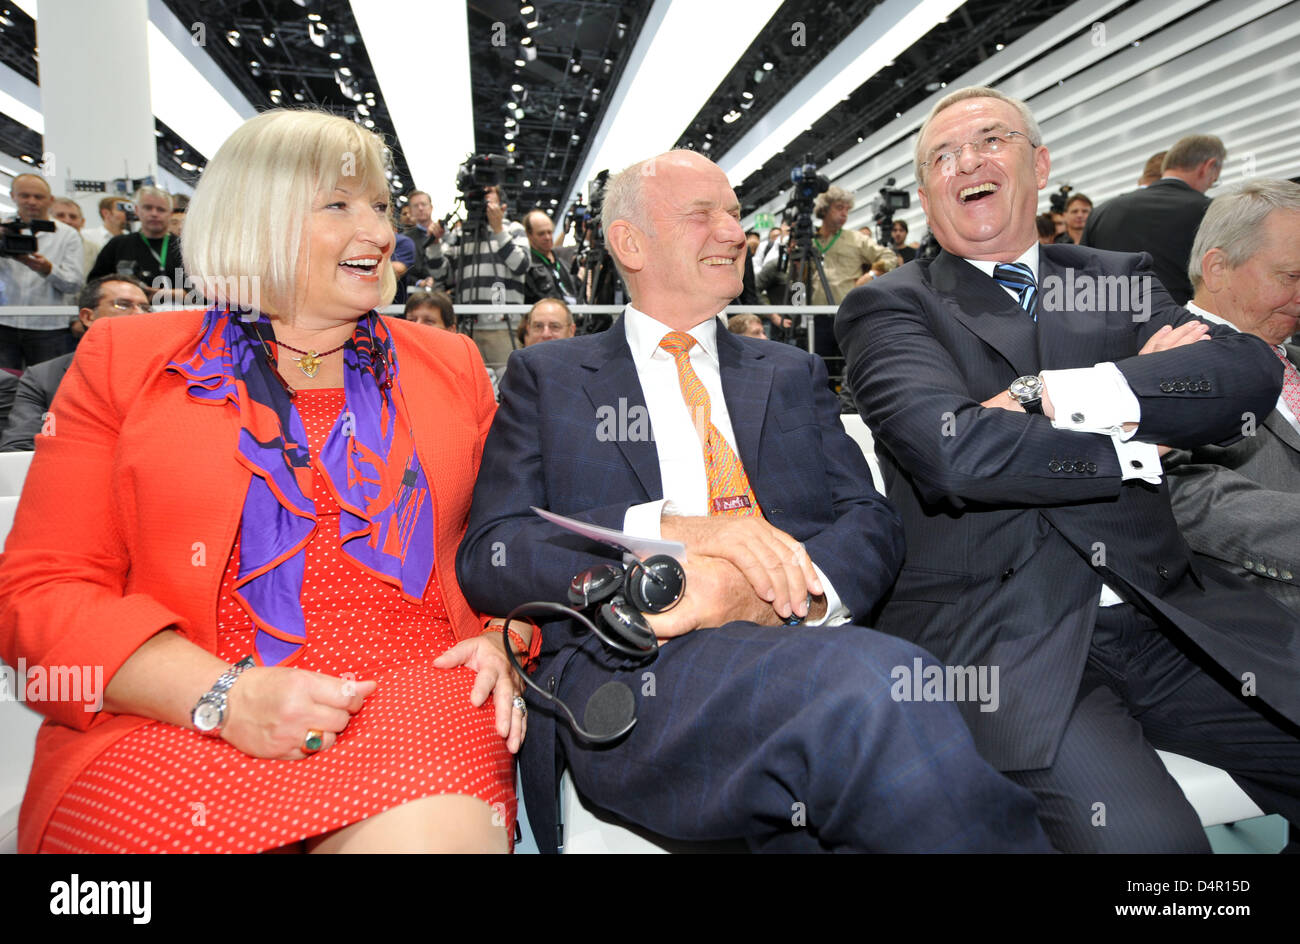 Ferdinand Piech (C), chairman of Volkswagen?s supervisory board, his wife Ursula (L) and Volkswagen (VW) CEO Martin Winterkorn (R) laugh ahead of the upcoming Frankfurt Motor Show (IAA) in Frankfurt Main, Germany, 15 September 2009. The 63rd IAA will run from 17 to 27 September 2009. Photo: Uwe Zucchi Stock Photo